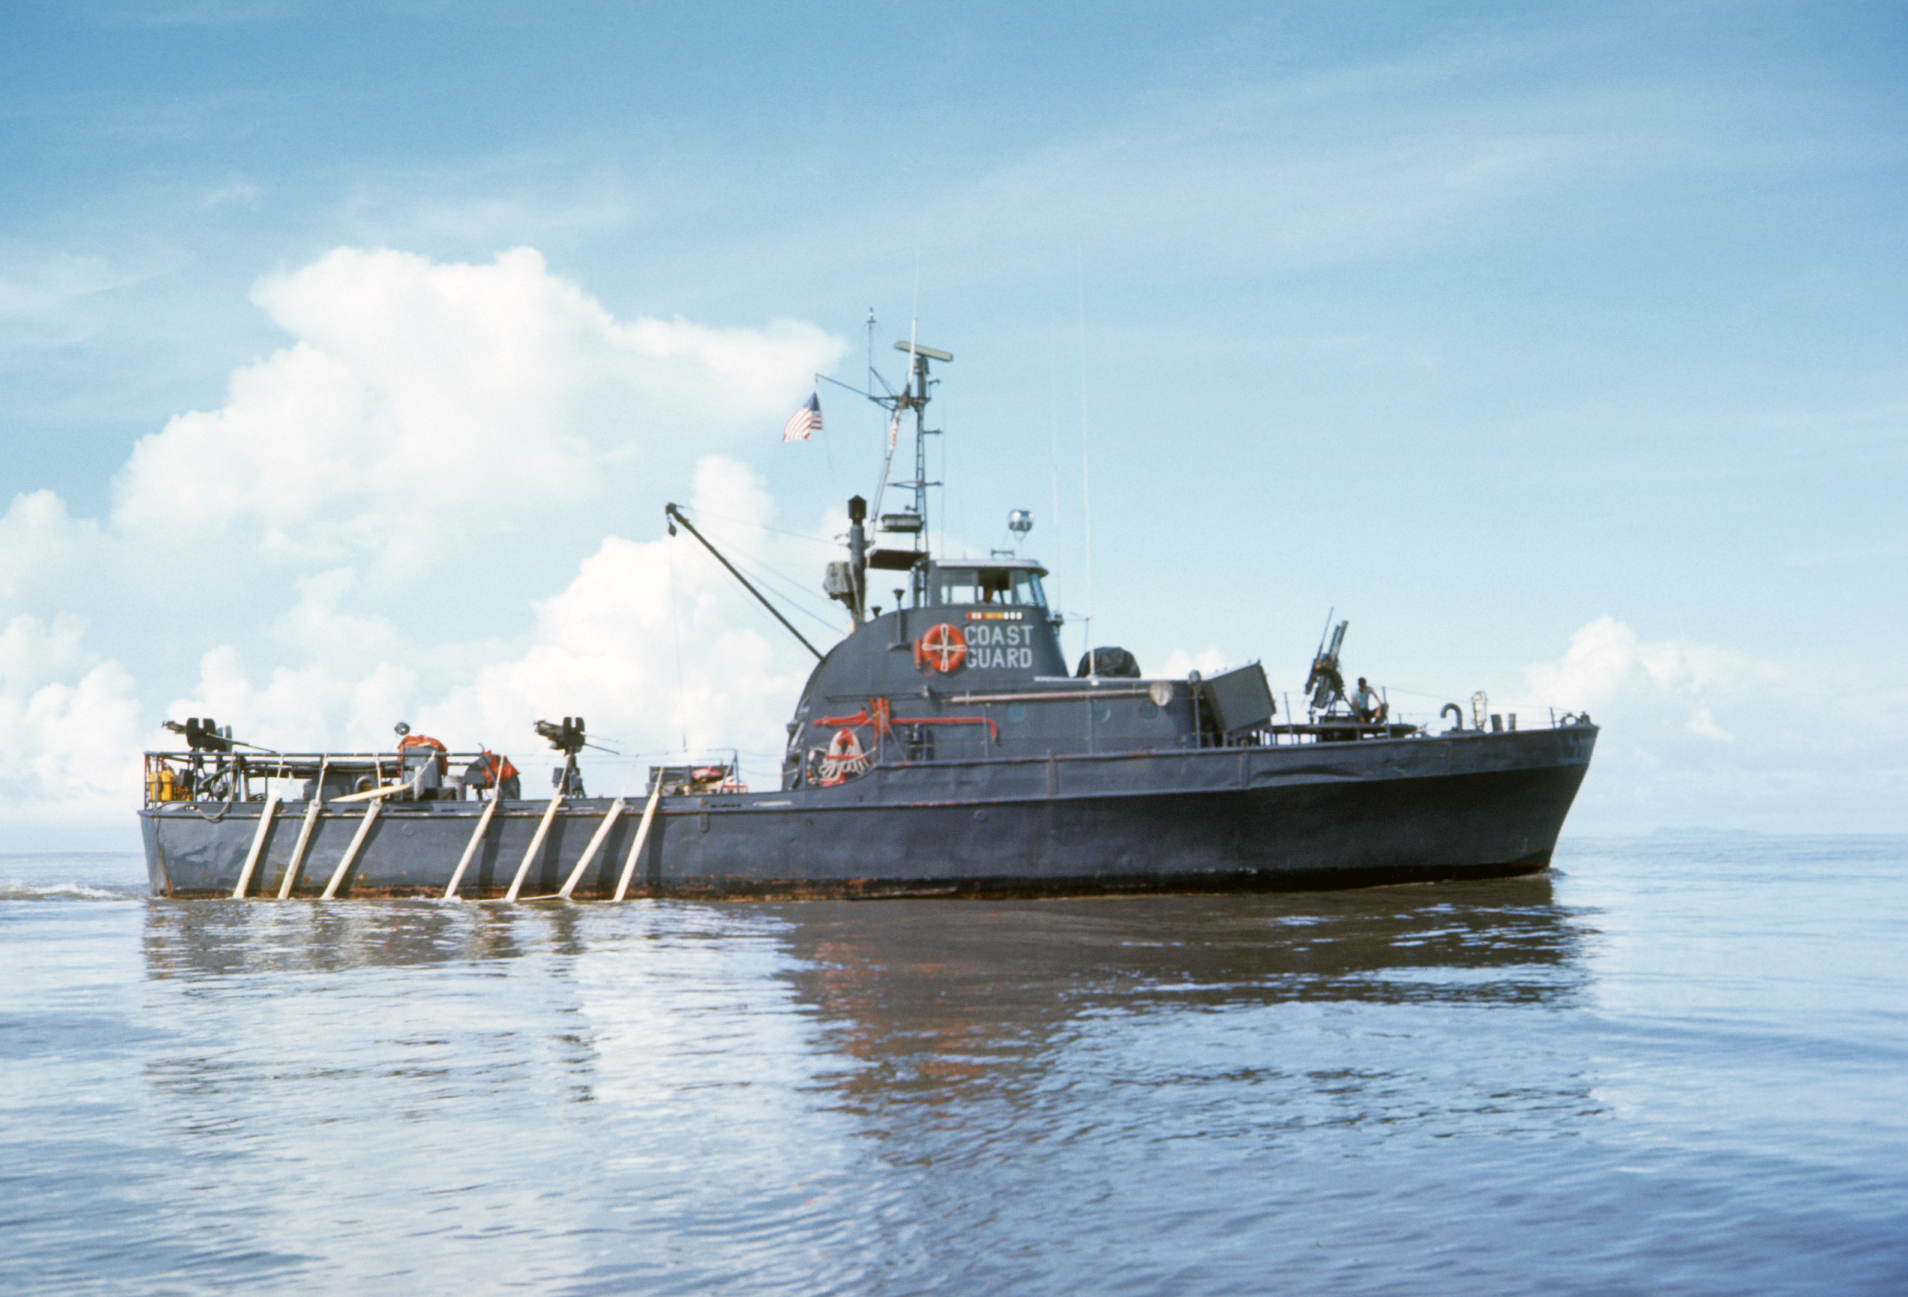 The 82-foot patrol boat Point Cypress in its camouflage paint scheme in Vietnam. (U.S. Coast Guard)